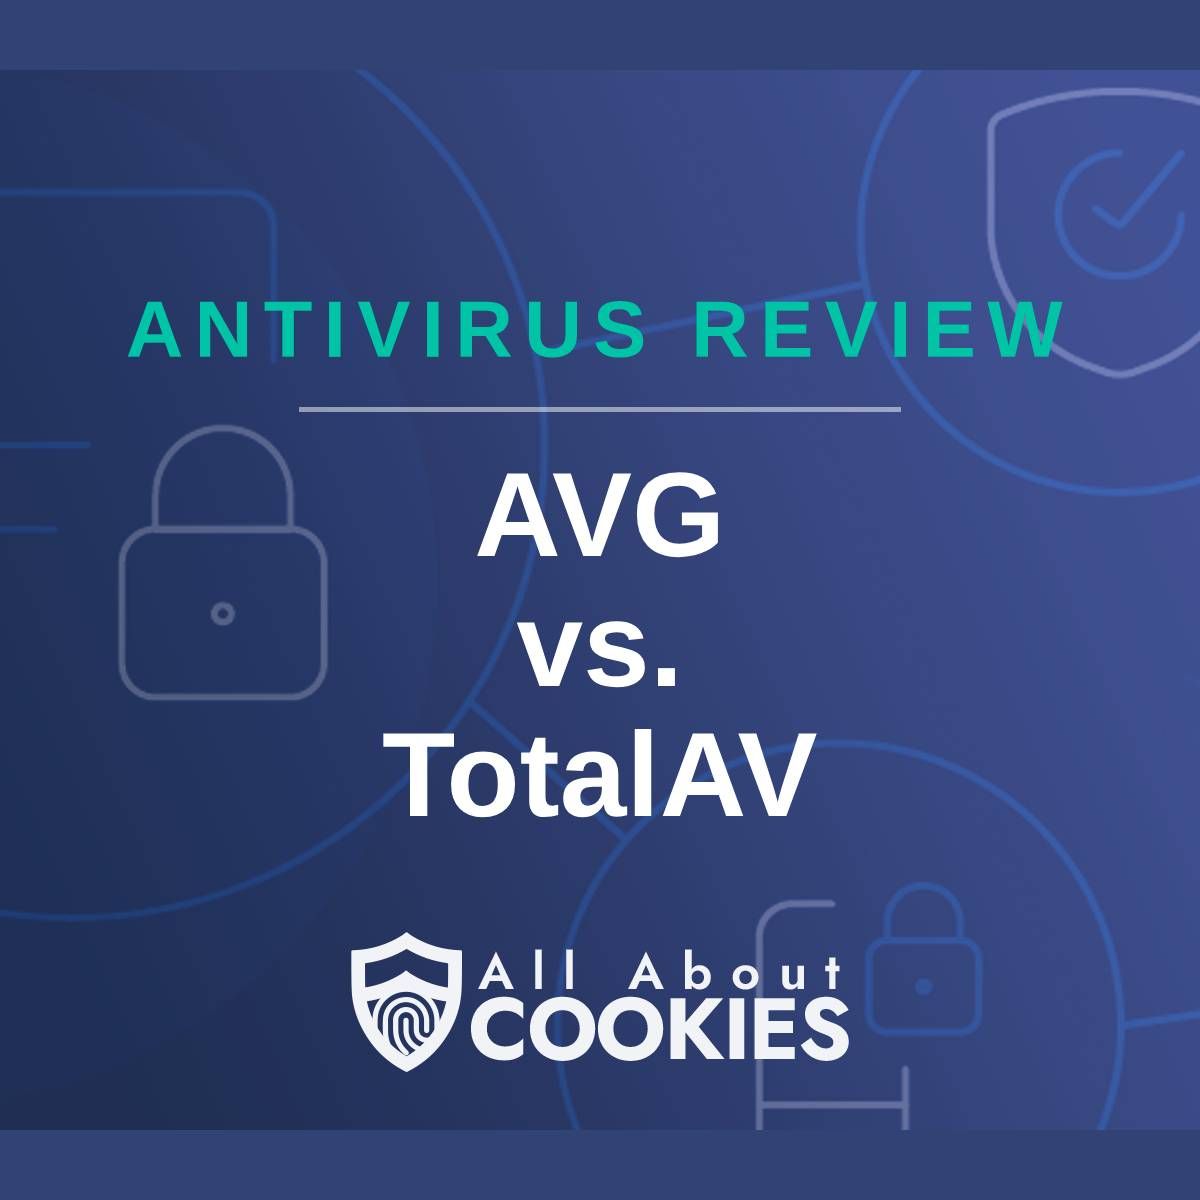 A blue background with images of locks and shields and the text &quot;AVG vs. TotalAV&quot;